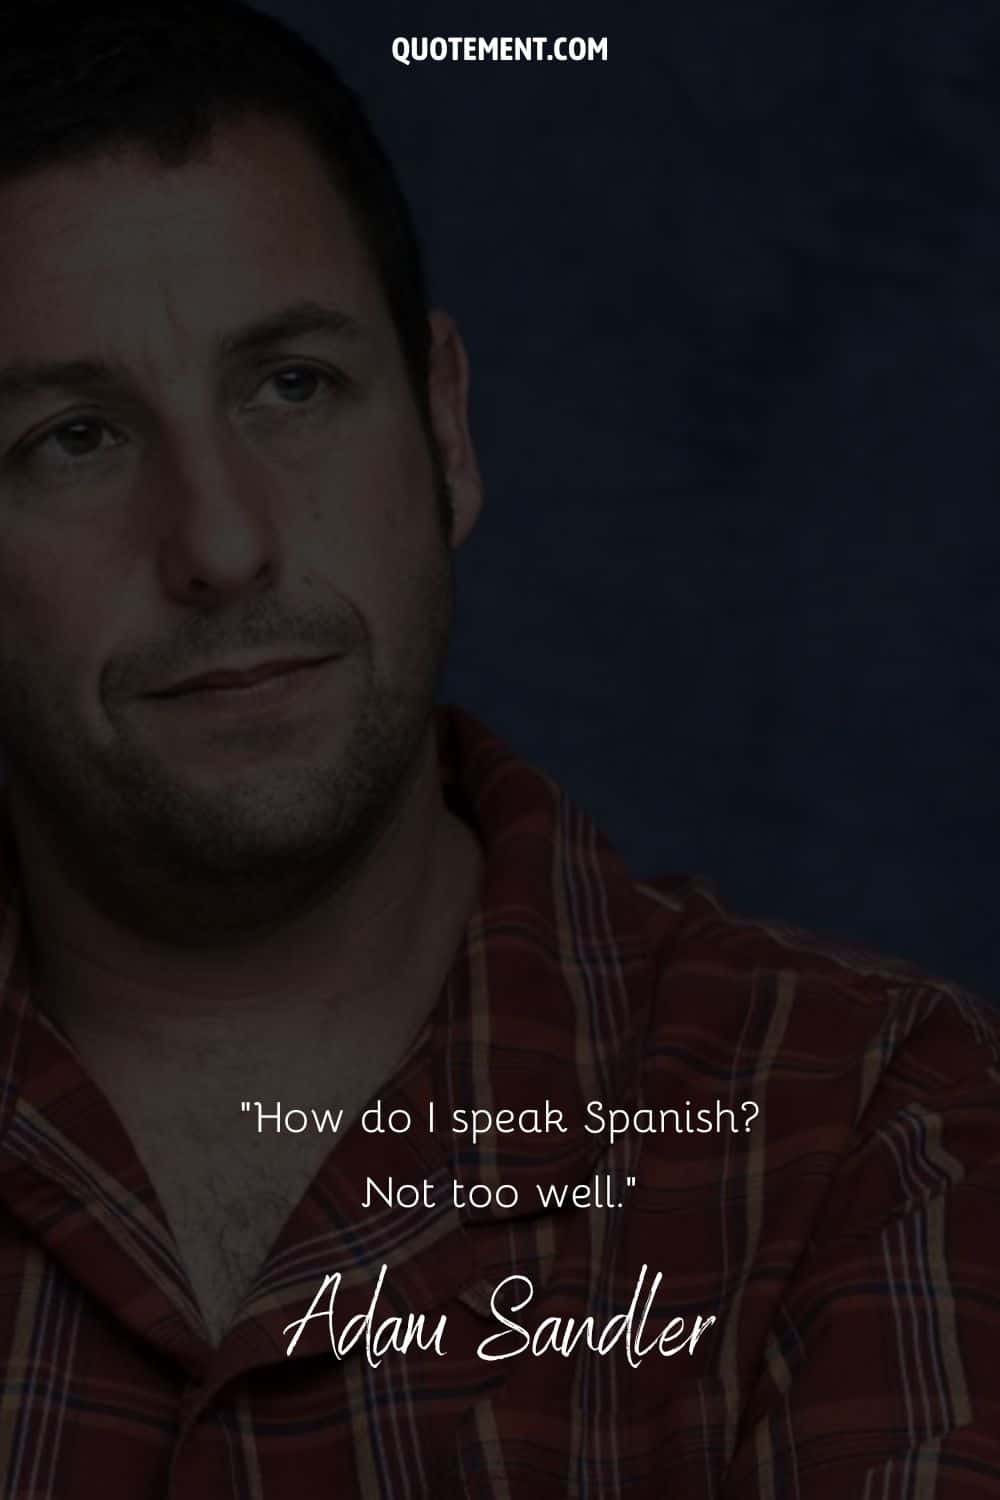 Adam Sandler image with a funny quote on Spanish language